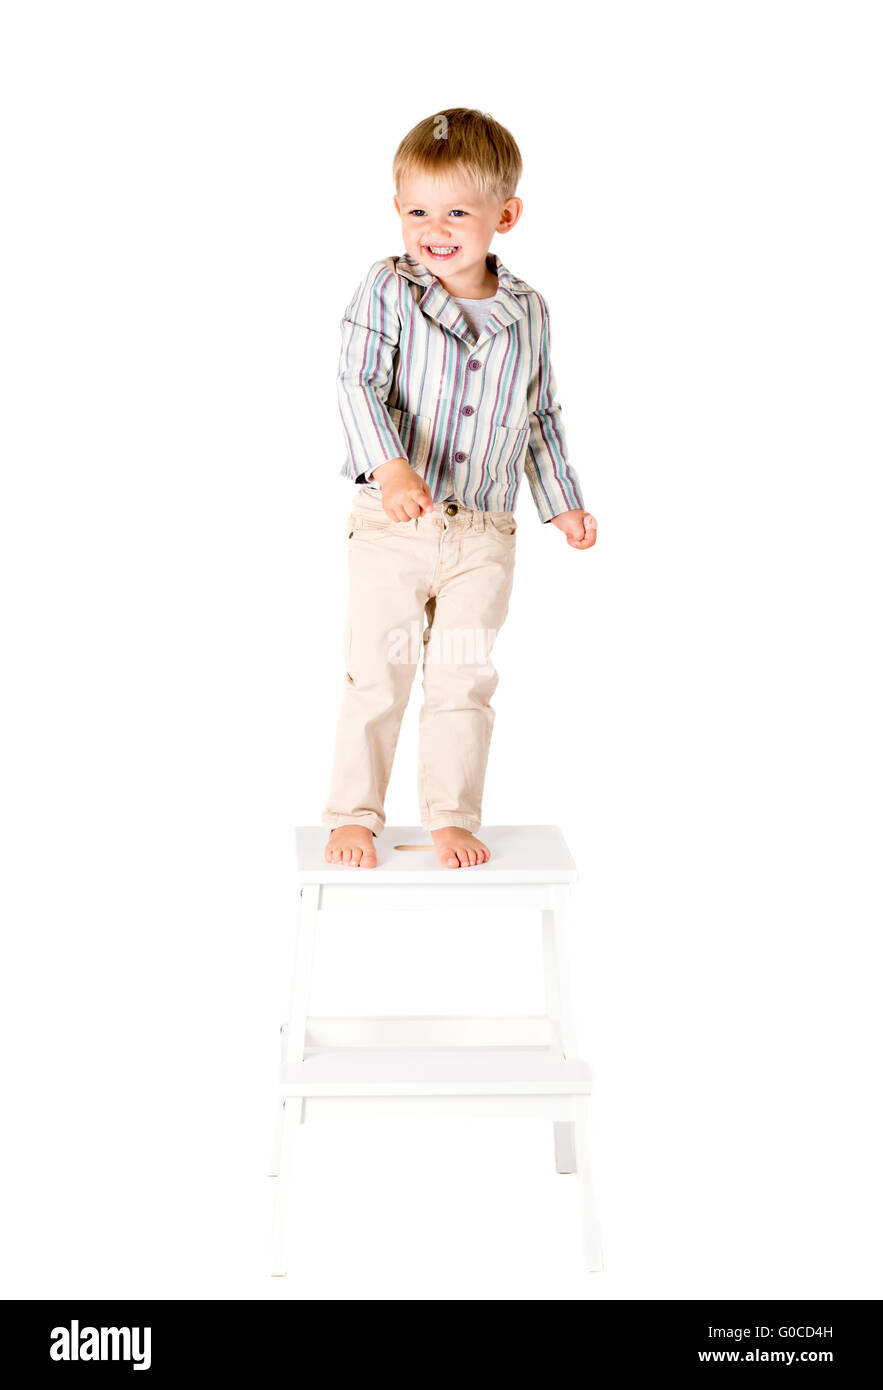 Boy shot in the studio on a white background standing on stool Stock Photo